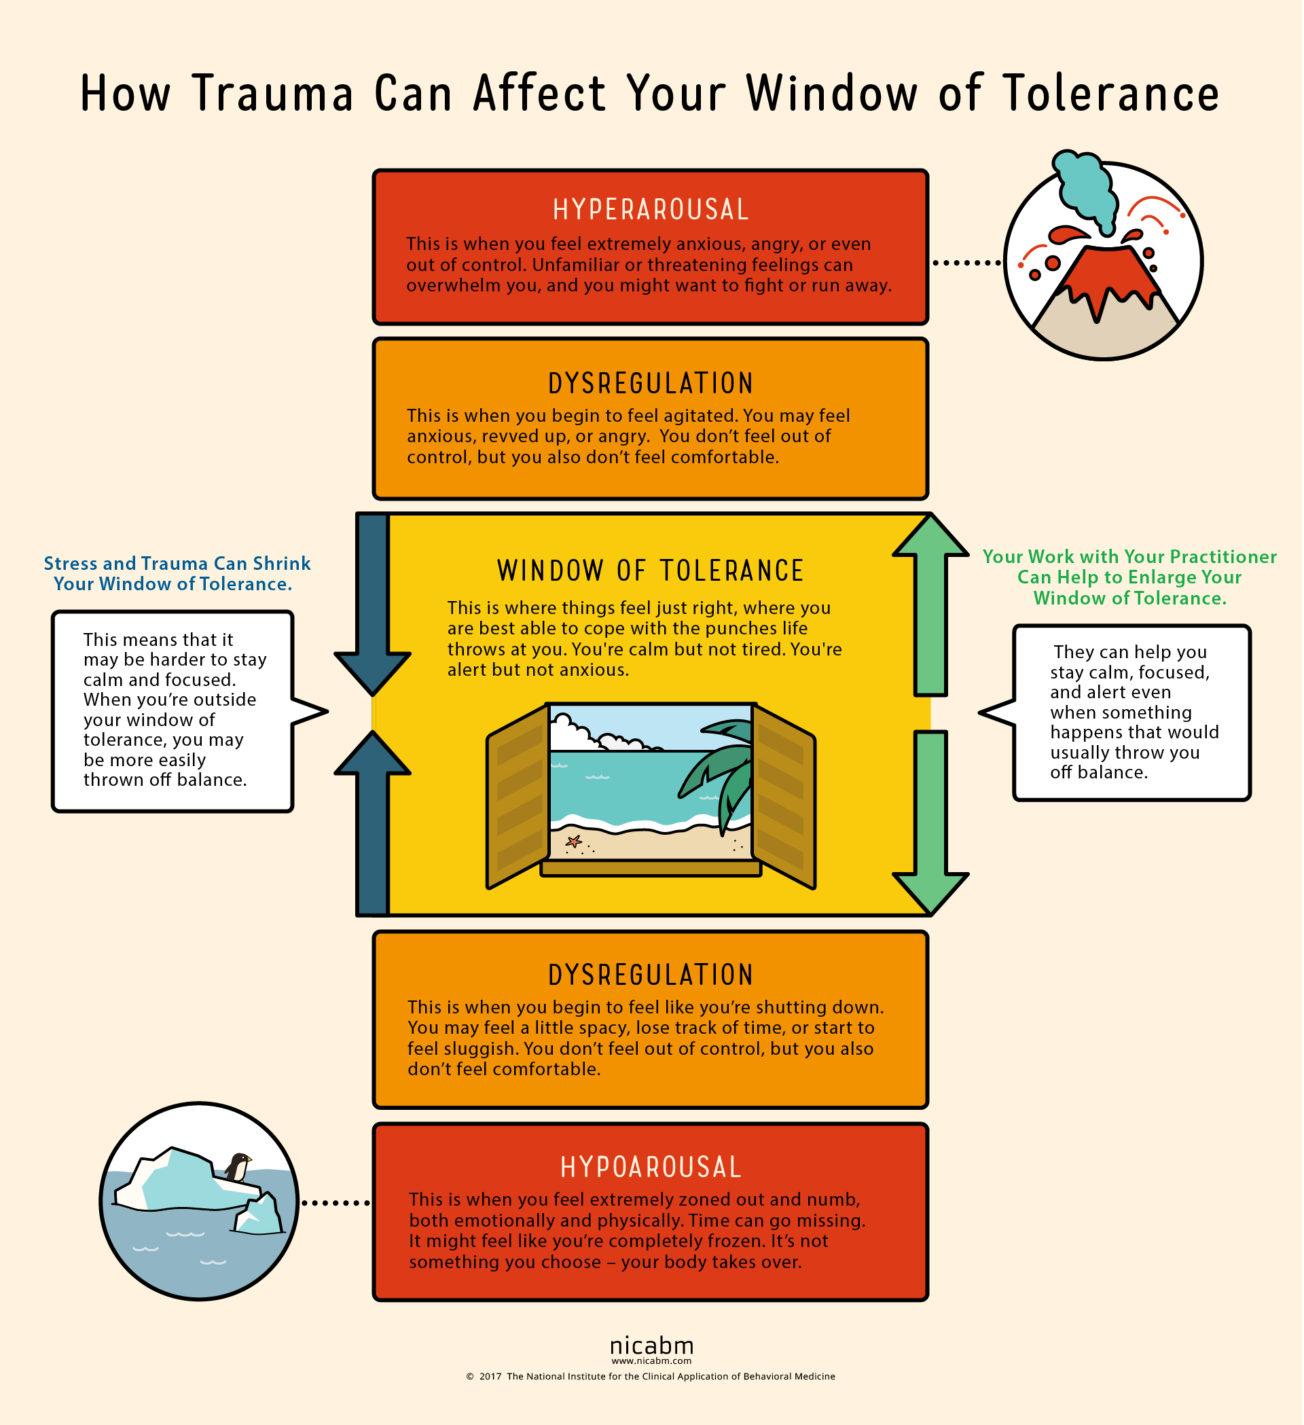 Get Familiar With Your Window of Tolerance